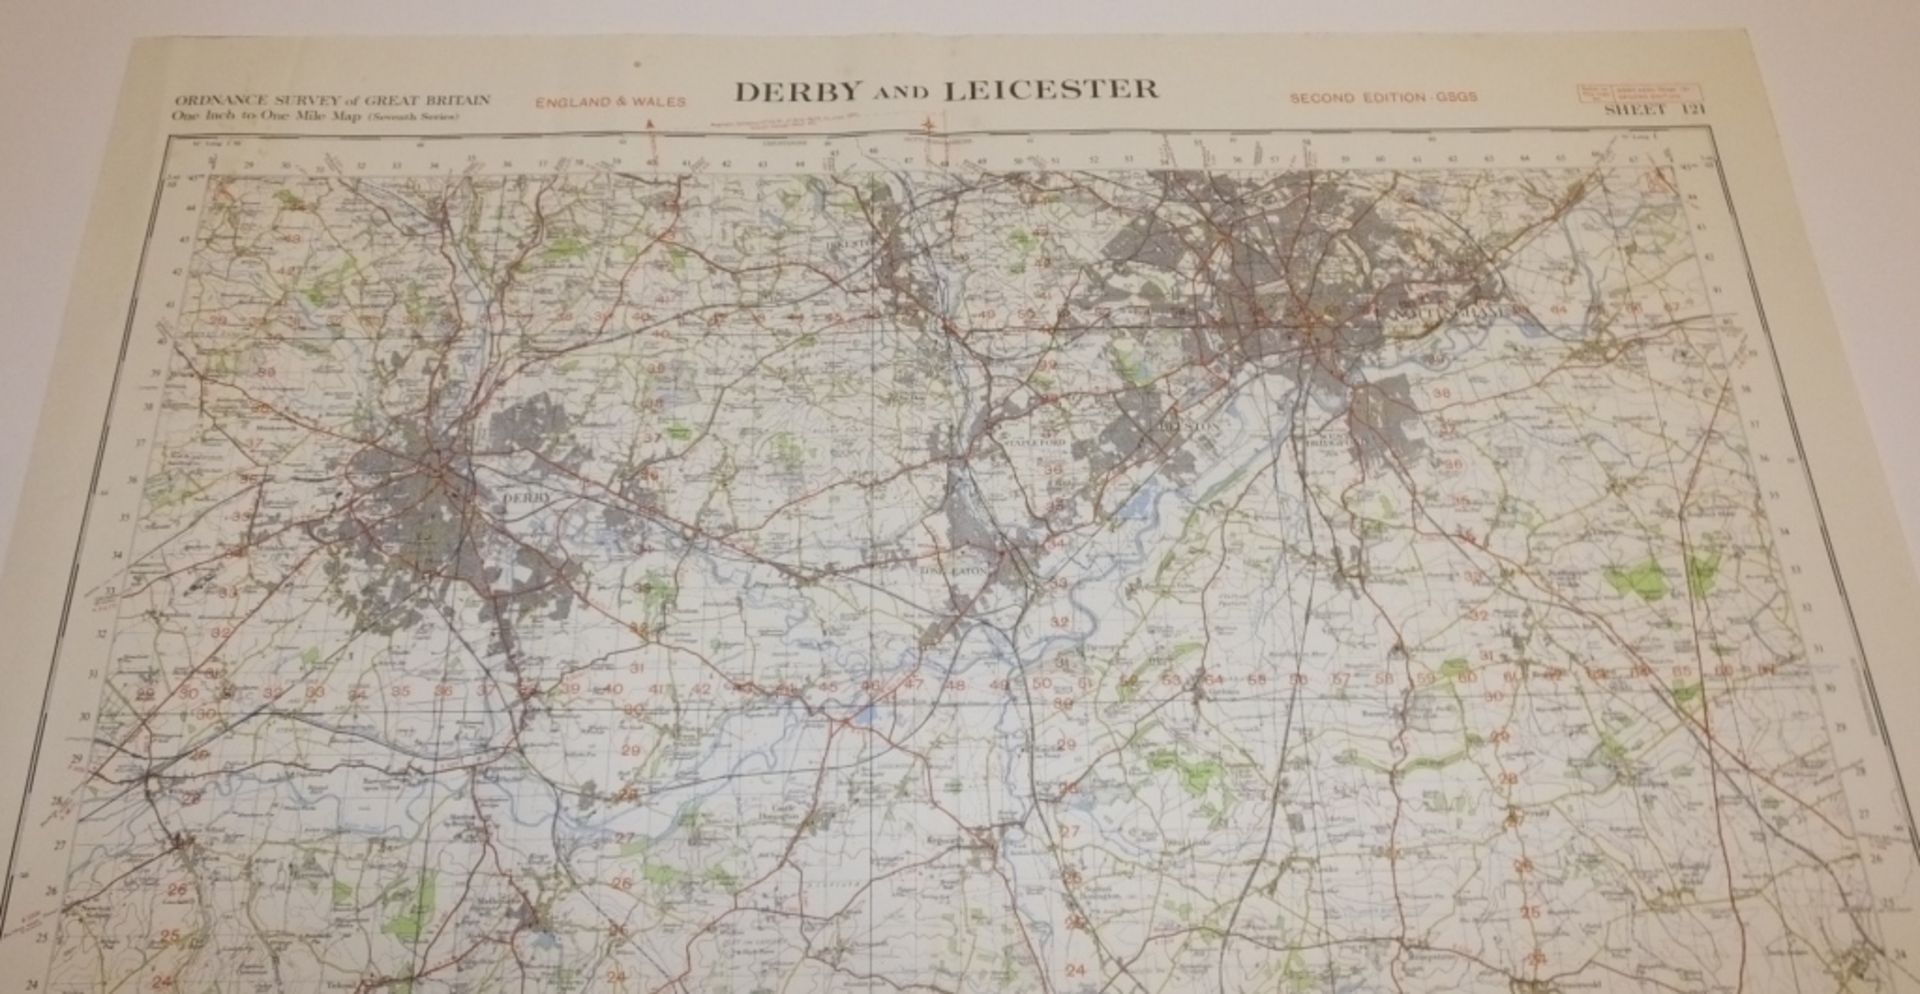 15x ENGLAND & WALES MAP DERBY LEICESTER 1INCH 1MILE 1954 7TH SERIES 2GSGS SHEET 121 - Image 3 of 5